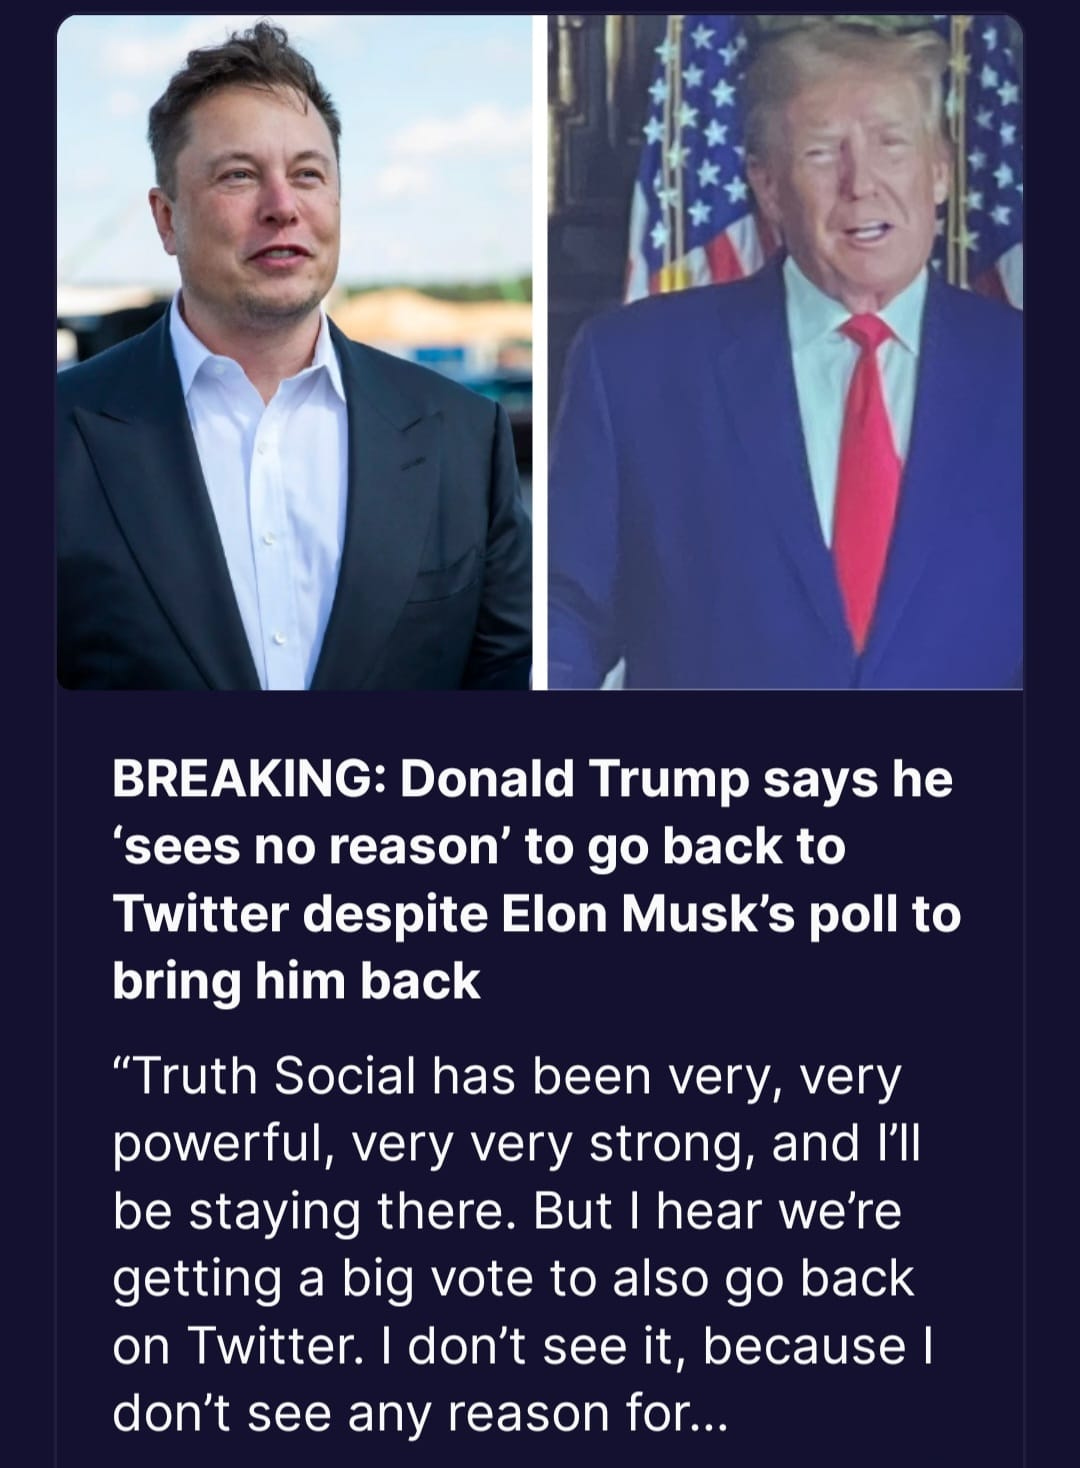 May be an image of 2 people, people standing and text that says 'BREAKING: Donald Trump says he 'sees no reason' to go back to Twitter despite Elon Musk's poll to bring him back "Truth Social has been very, very powerful, very very strong, and I'll be staying there. But hear we're getting a big vote to also go back on Twitter. don't see it, because don't see any reason for...'